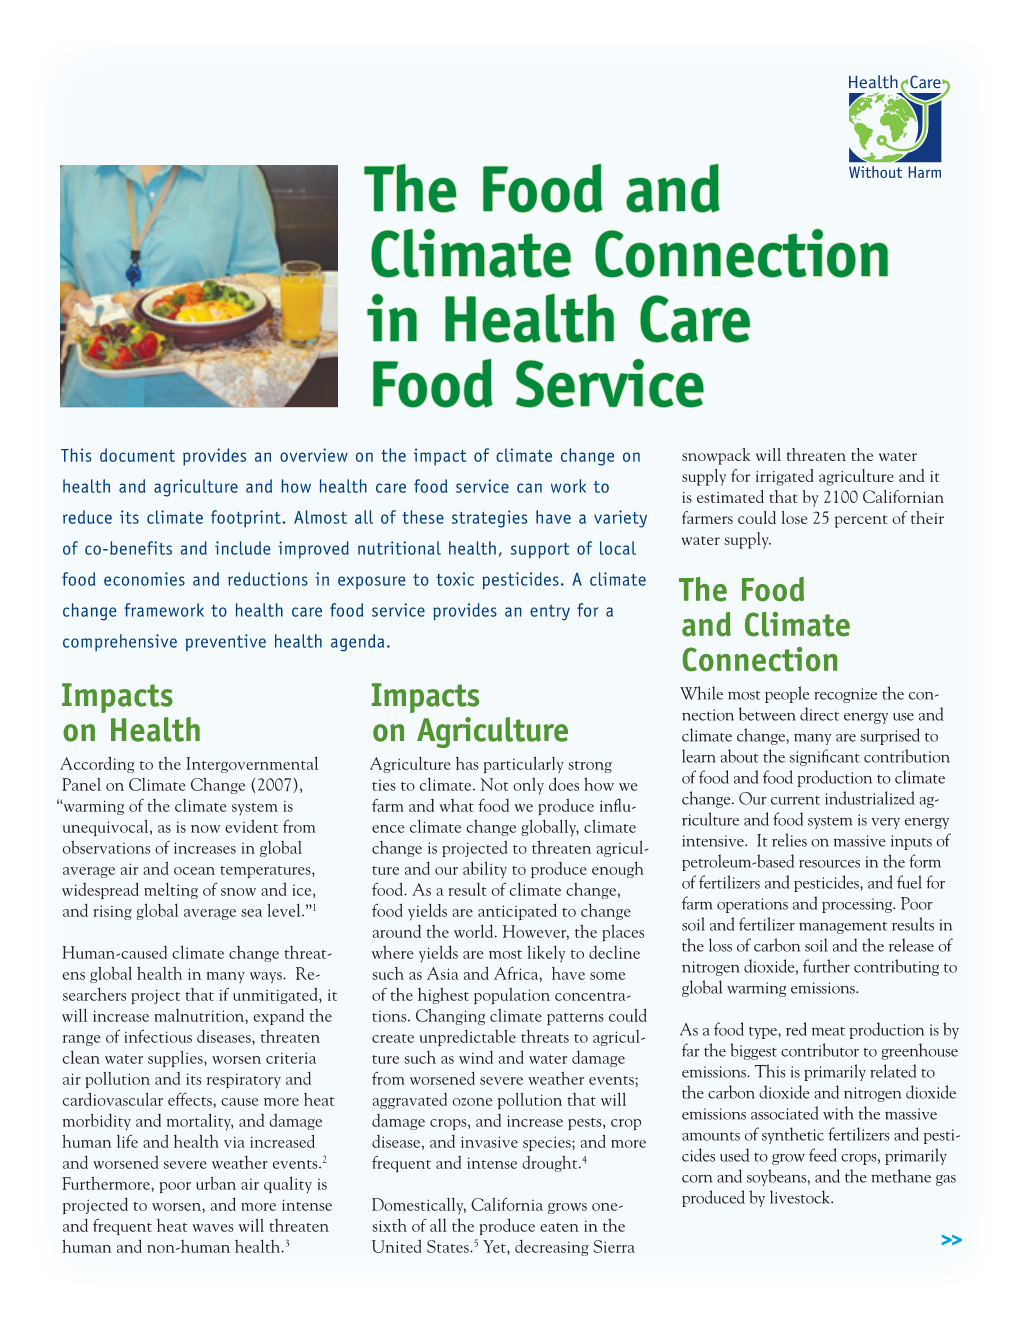 Food Service Climate Change Reduction Strategies